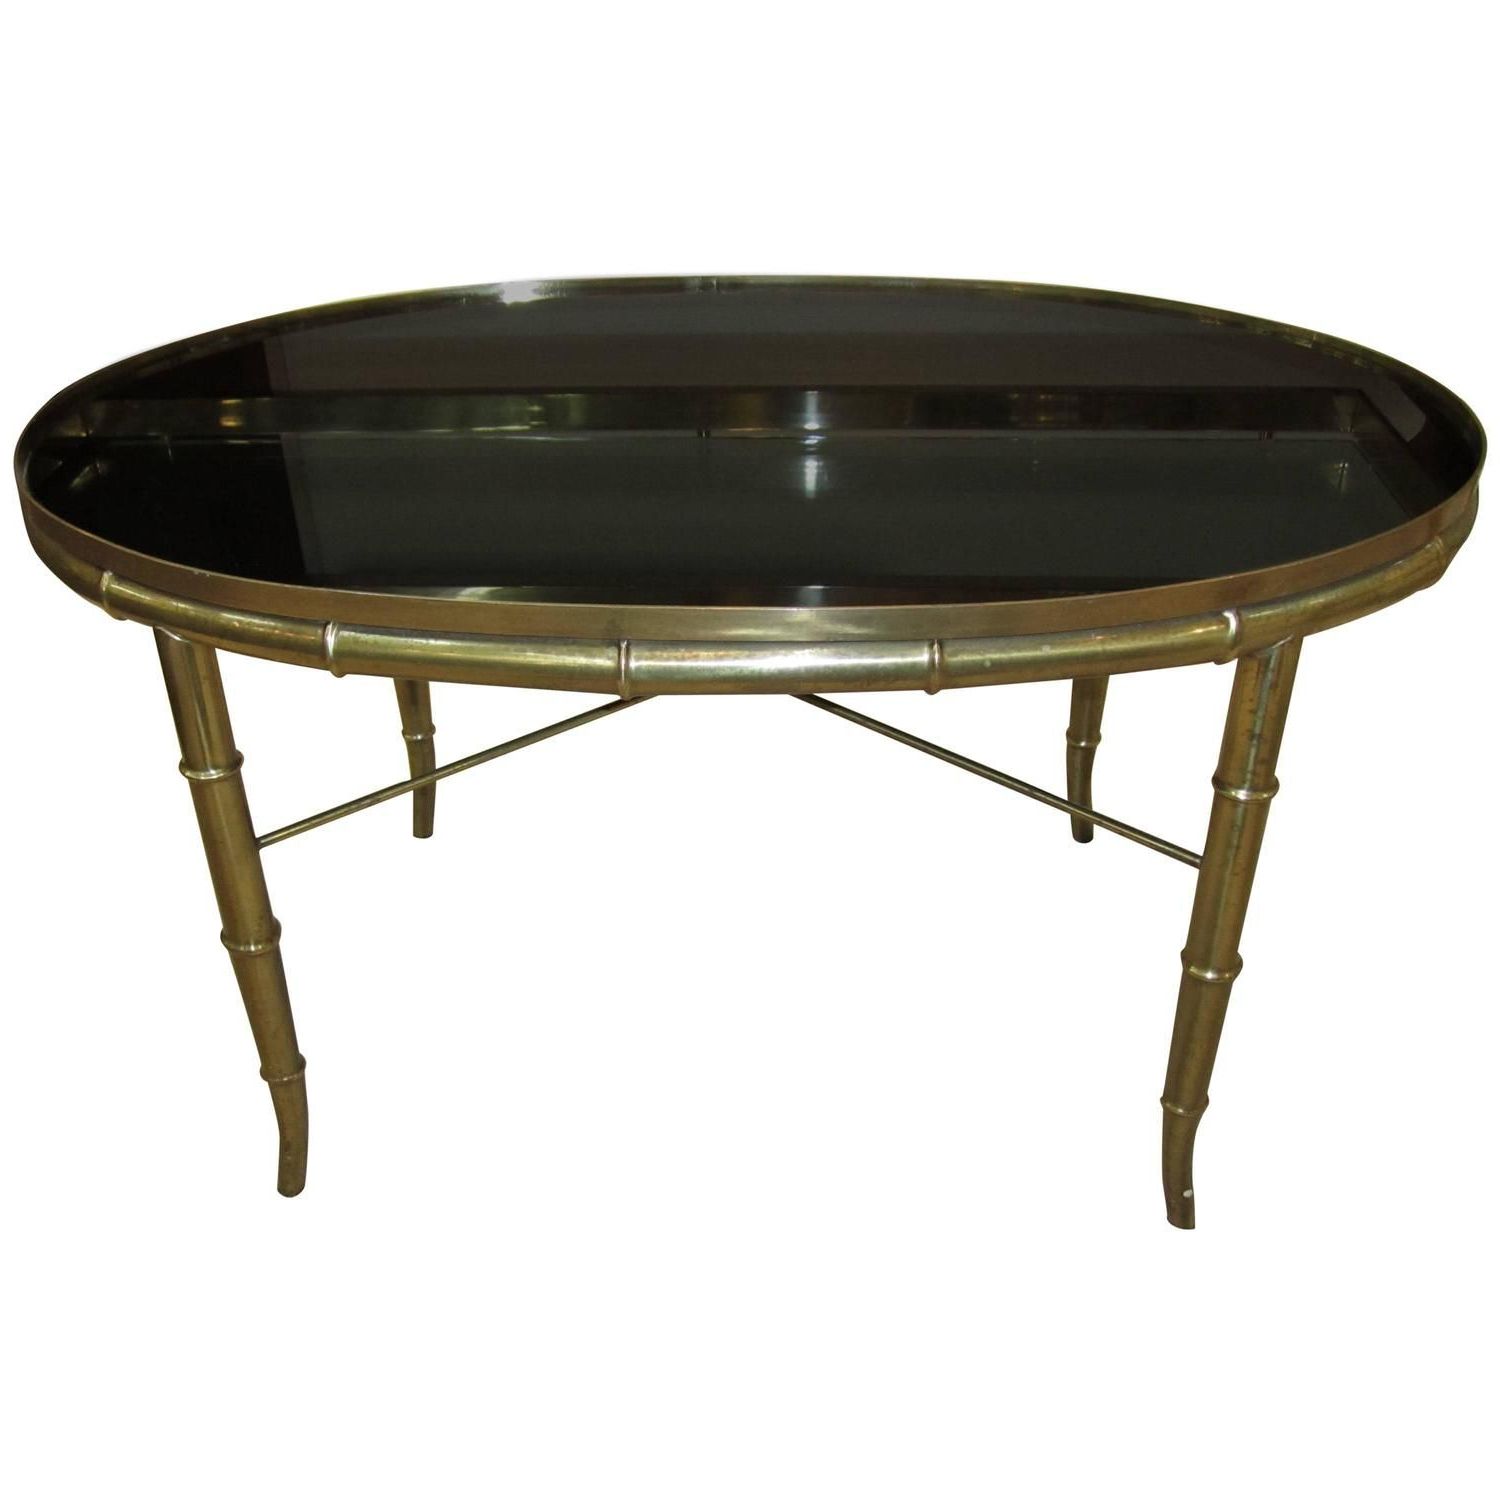 Famous Antique Brass Round Cocktail Tables Intended For Italian Gold Brass Bamboo Cocktail Table With Black Mirror (View 10 of 20)